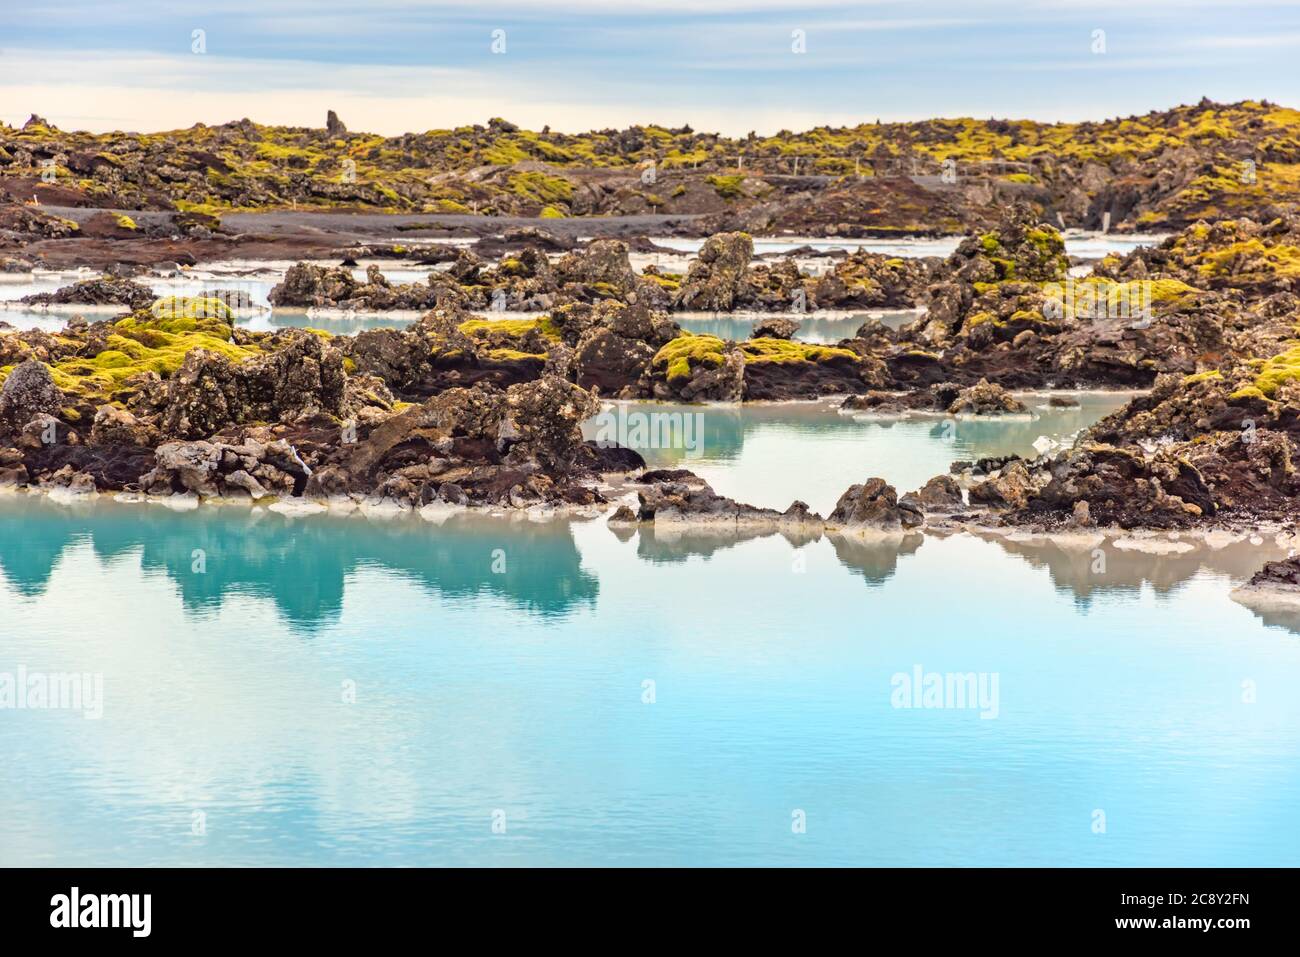 Blue Lagoon natural resort thermal pool near Reykjavik, Iceland. Famous tourist attraction. Stock Photo